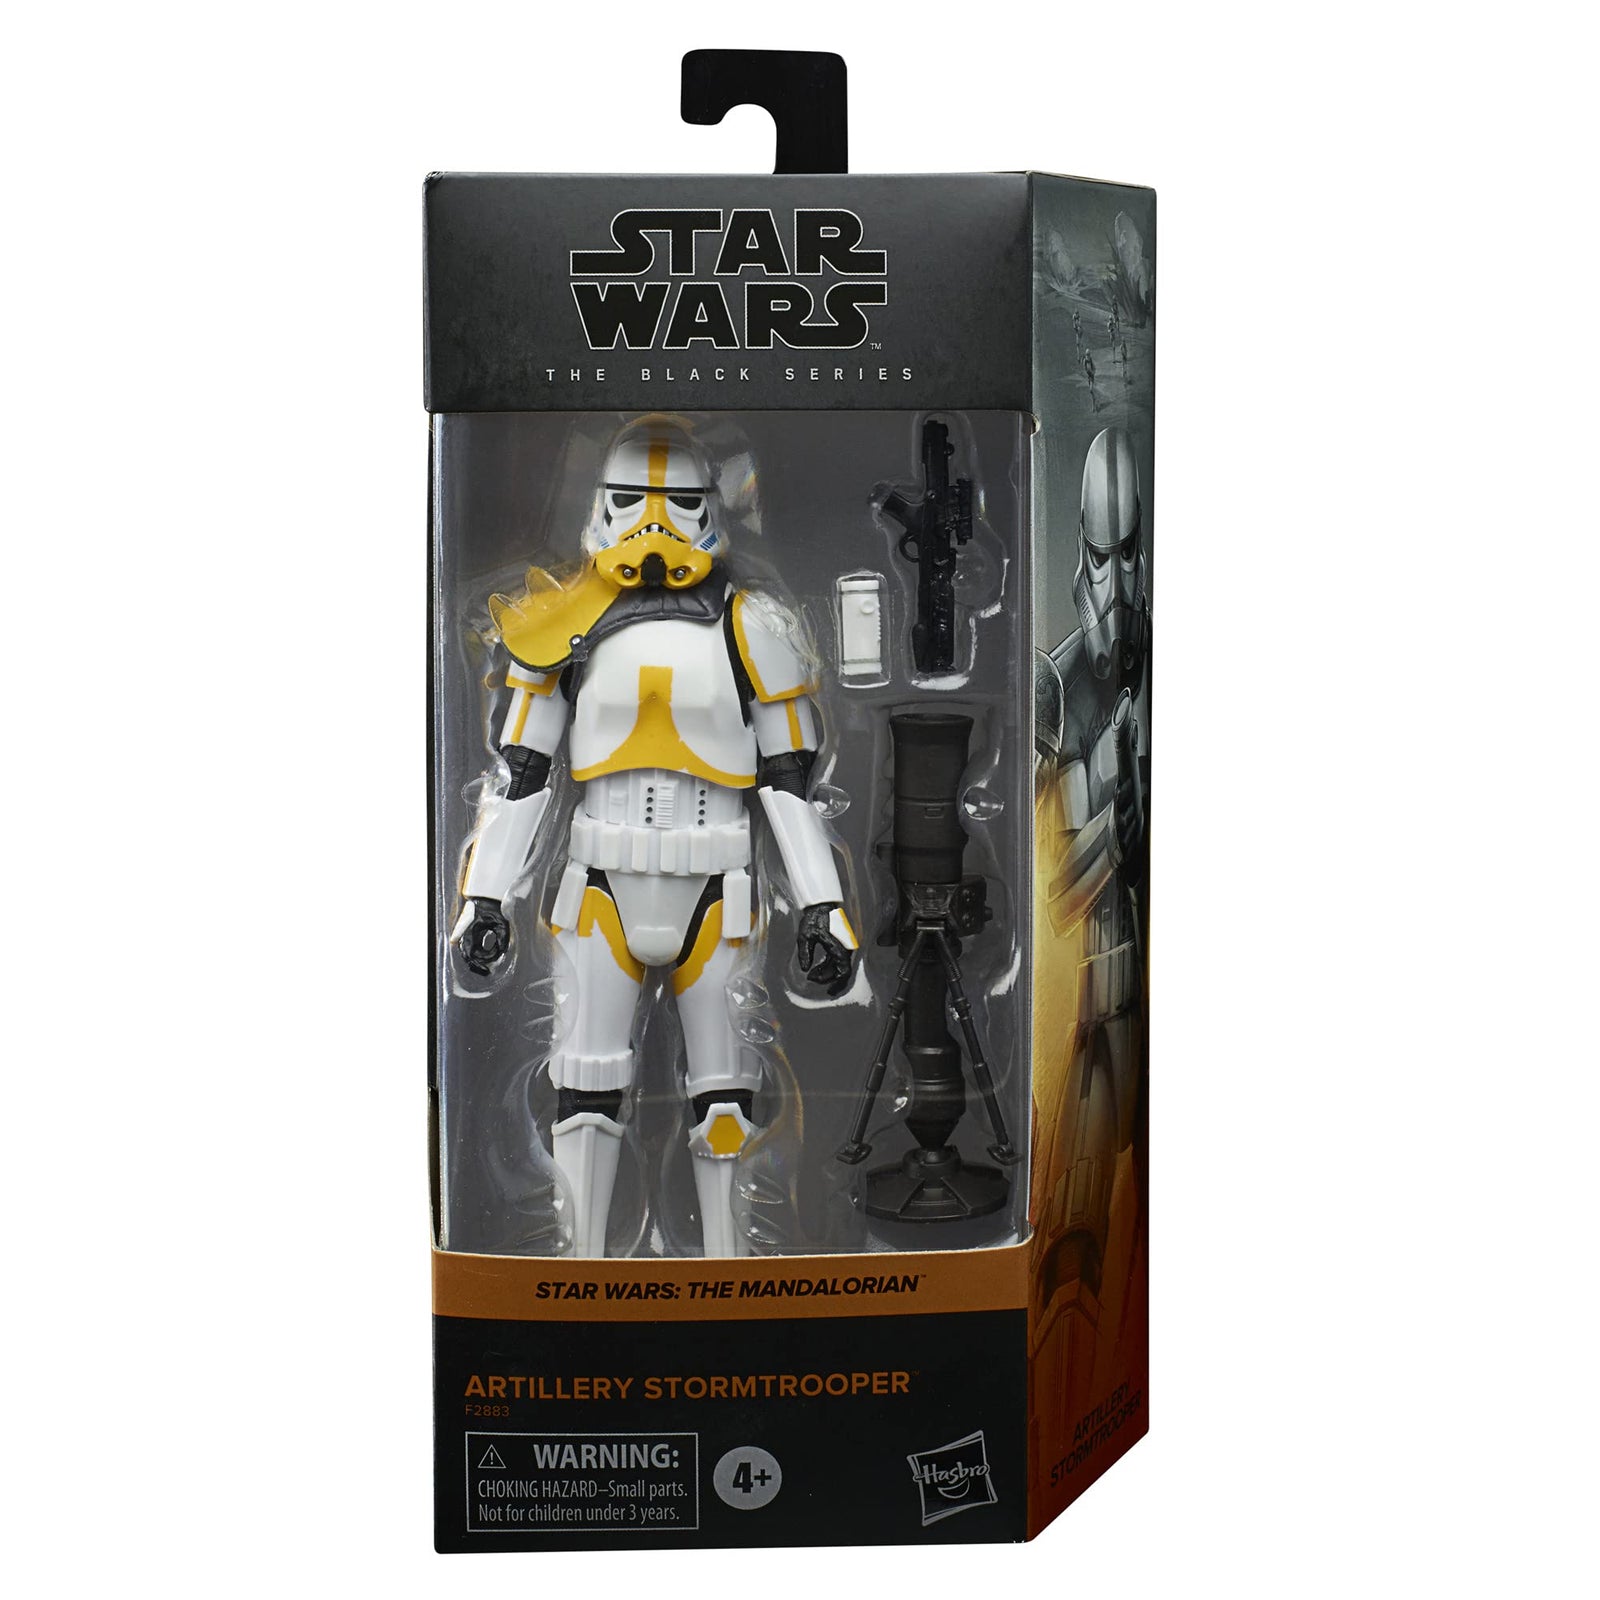 Star Wars The Black Series Artillery Stormtrooper Toy 6-Inch-Scale The Mandalorian Collectible Figure, Toys for Kids Ages 4 and Up (Amazon Exclusive),F2883